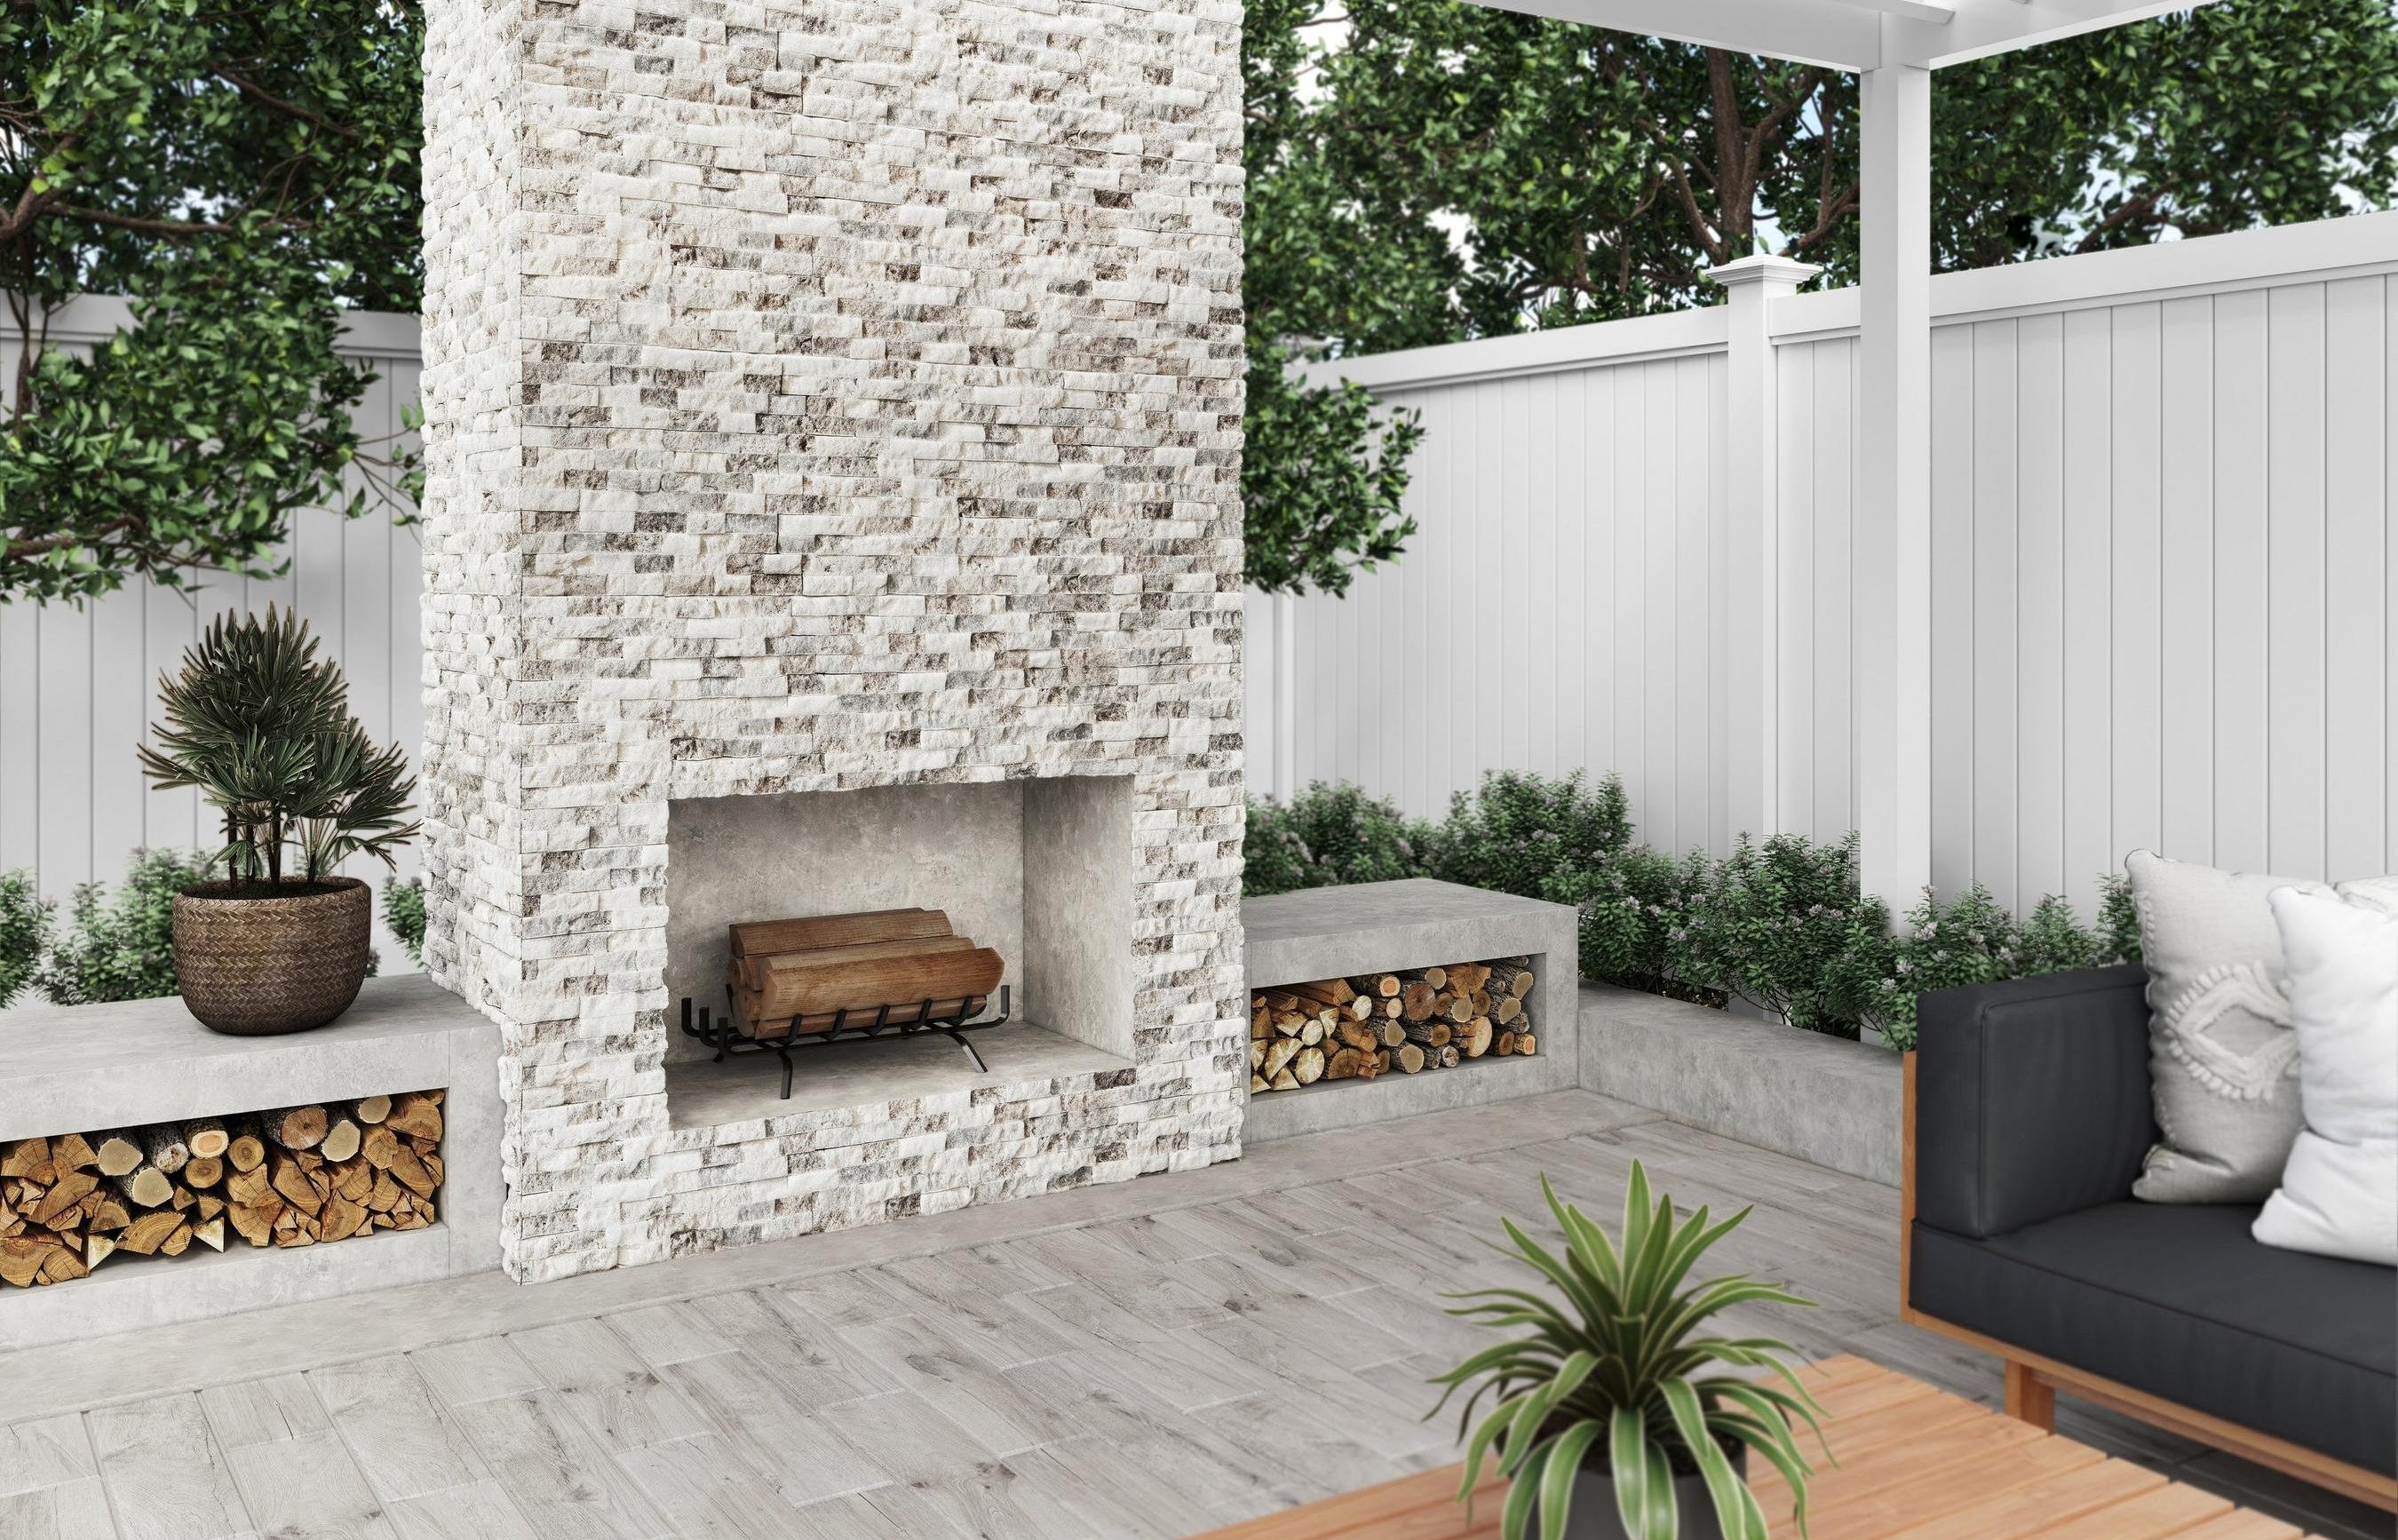 Outdoor seating area with white stone ledger fireplace.